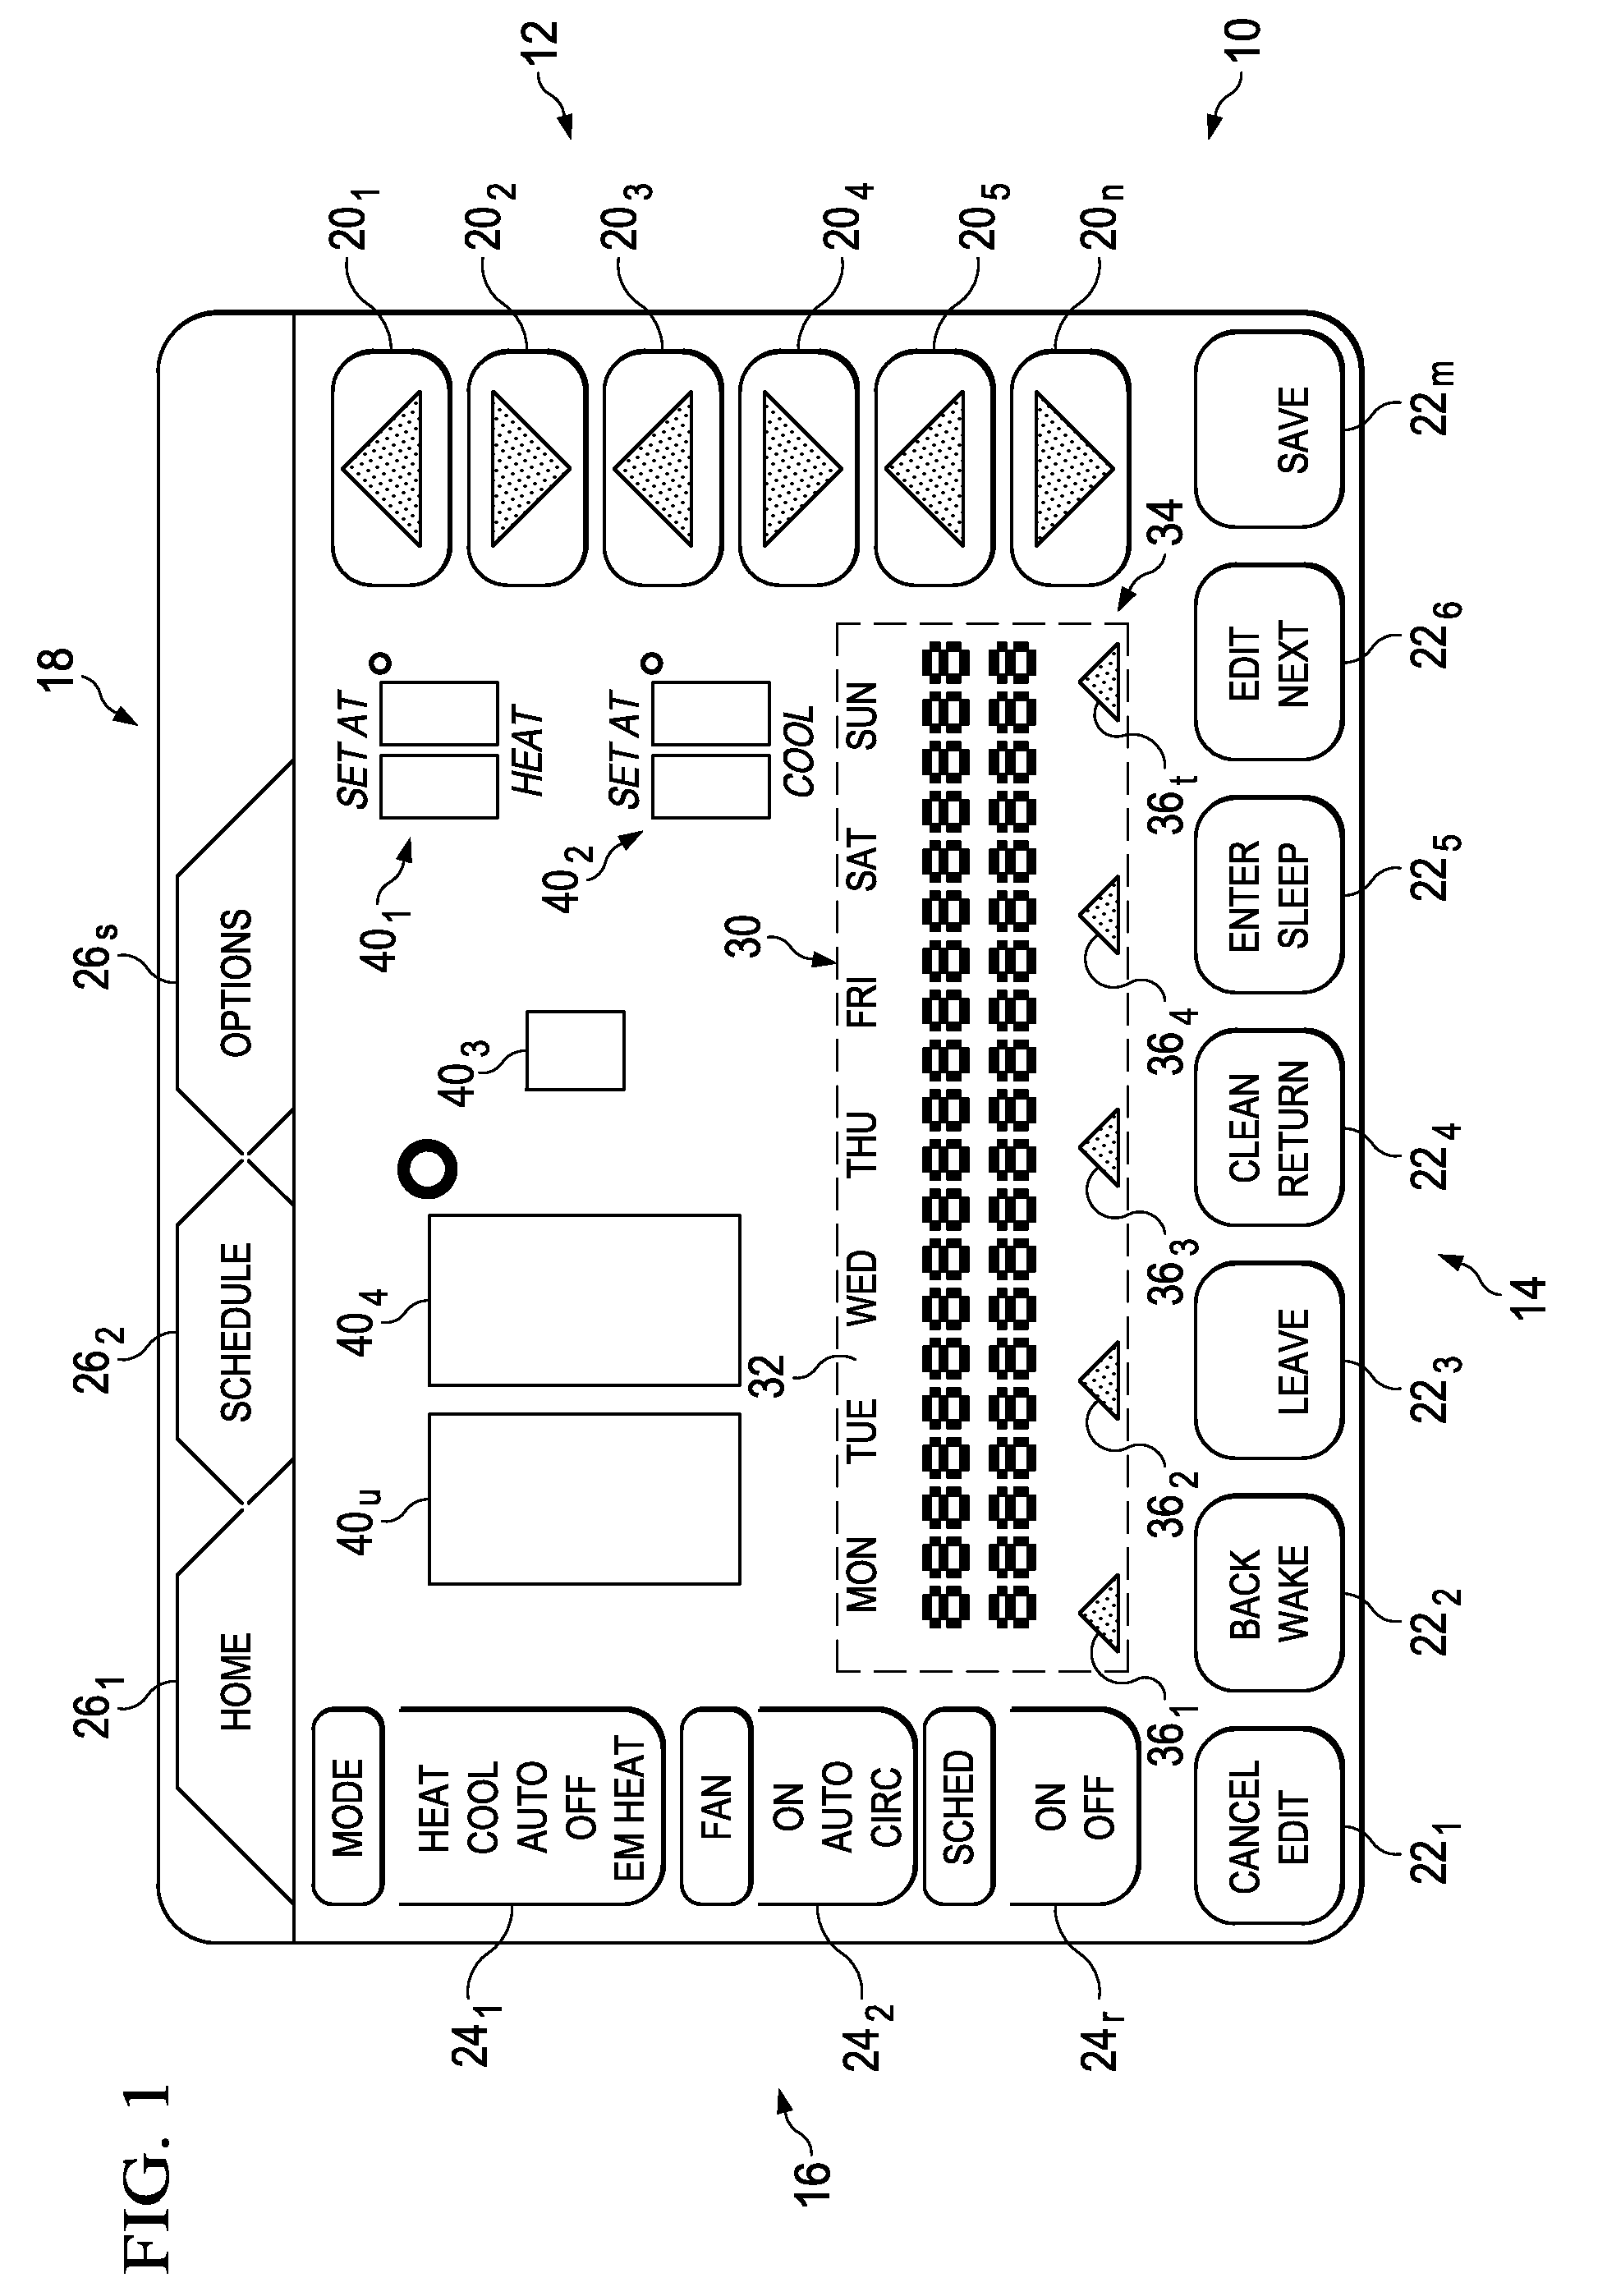 Display apparatus and method having custom date and time-based schedule hold capability for an environmental control system